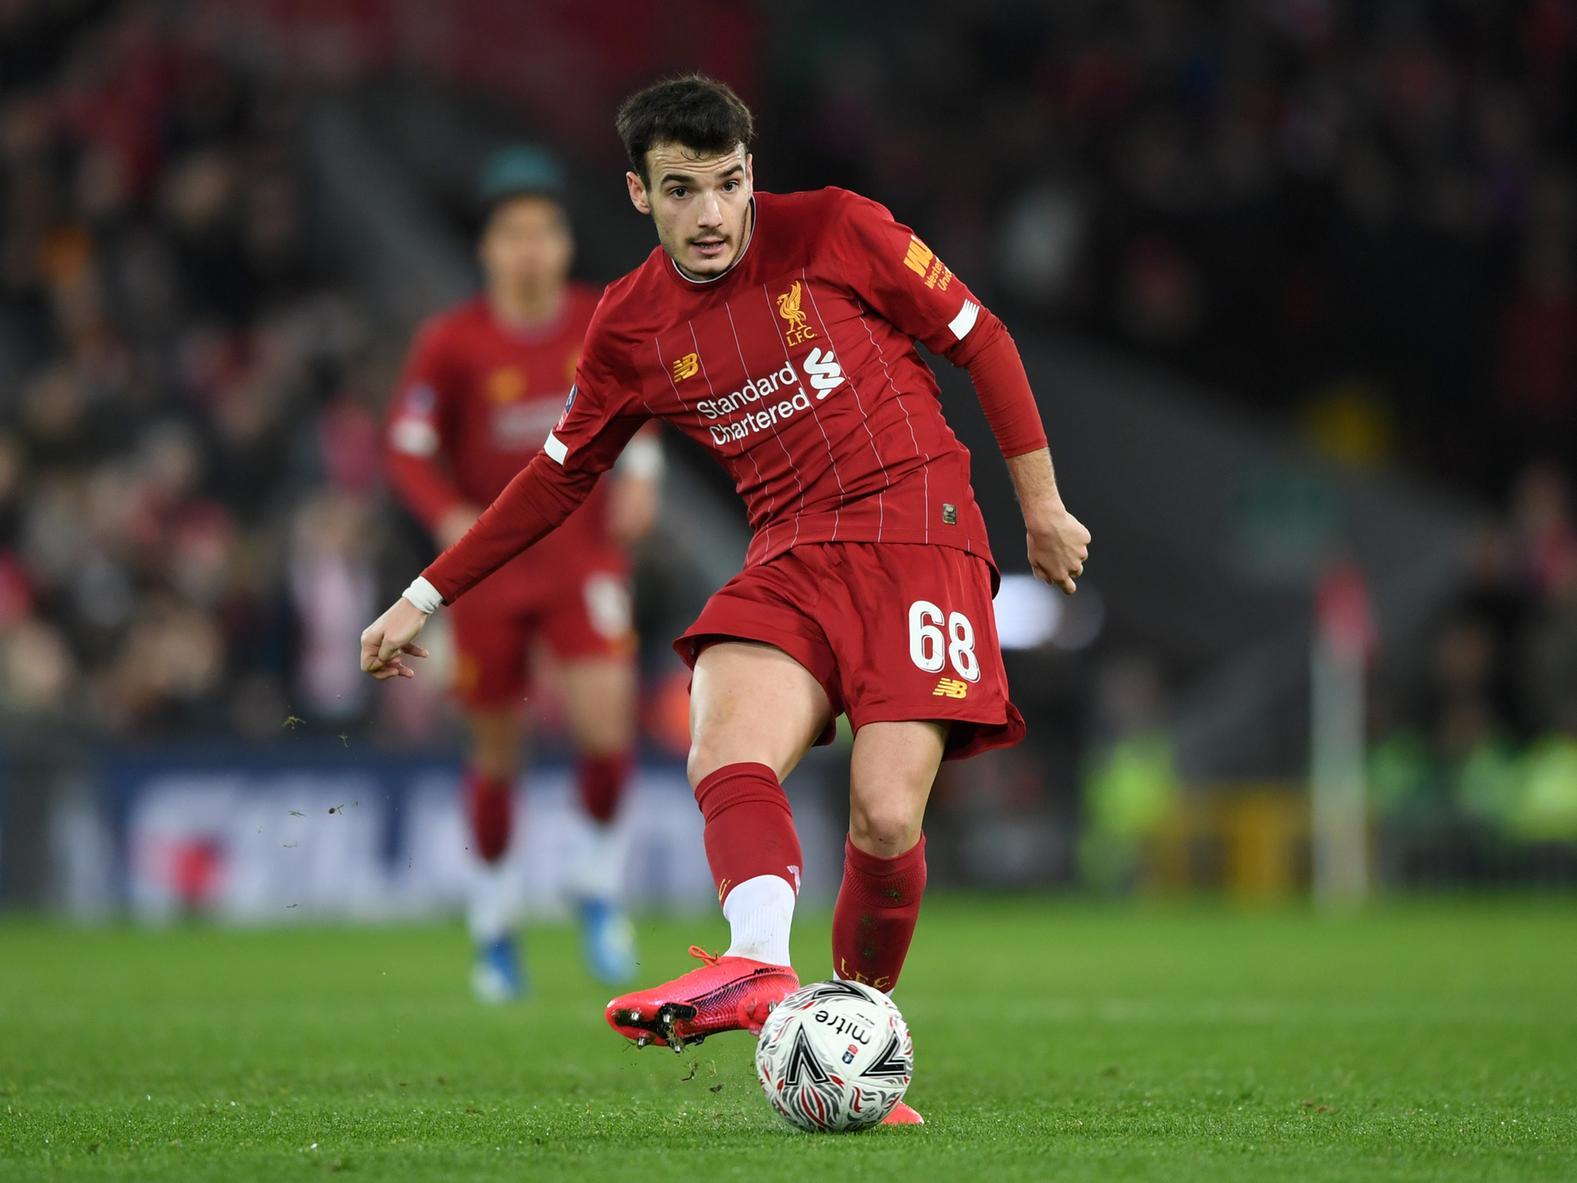 The 22-year-old defensive-minded midfielder has enjoyed game time whilst out on loan in Europe, but could do with a stint at an English club to come up to speed.